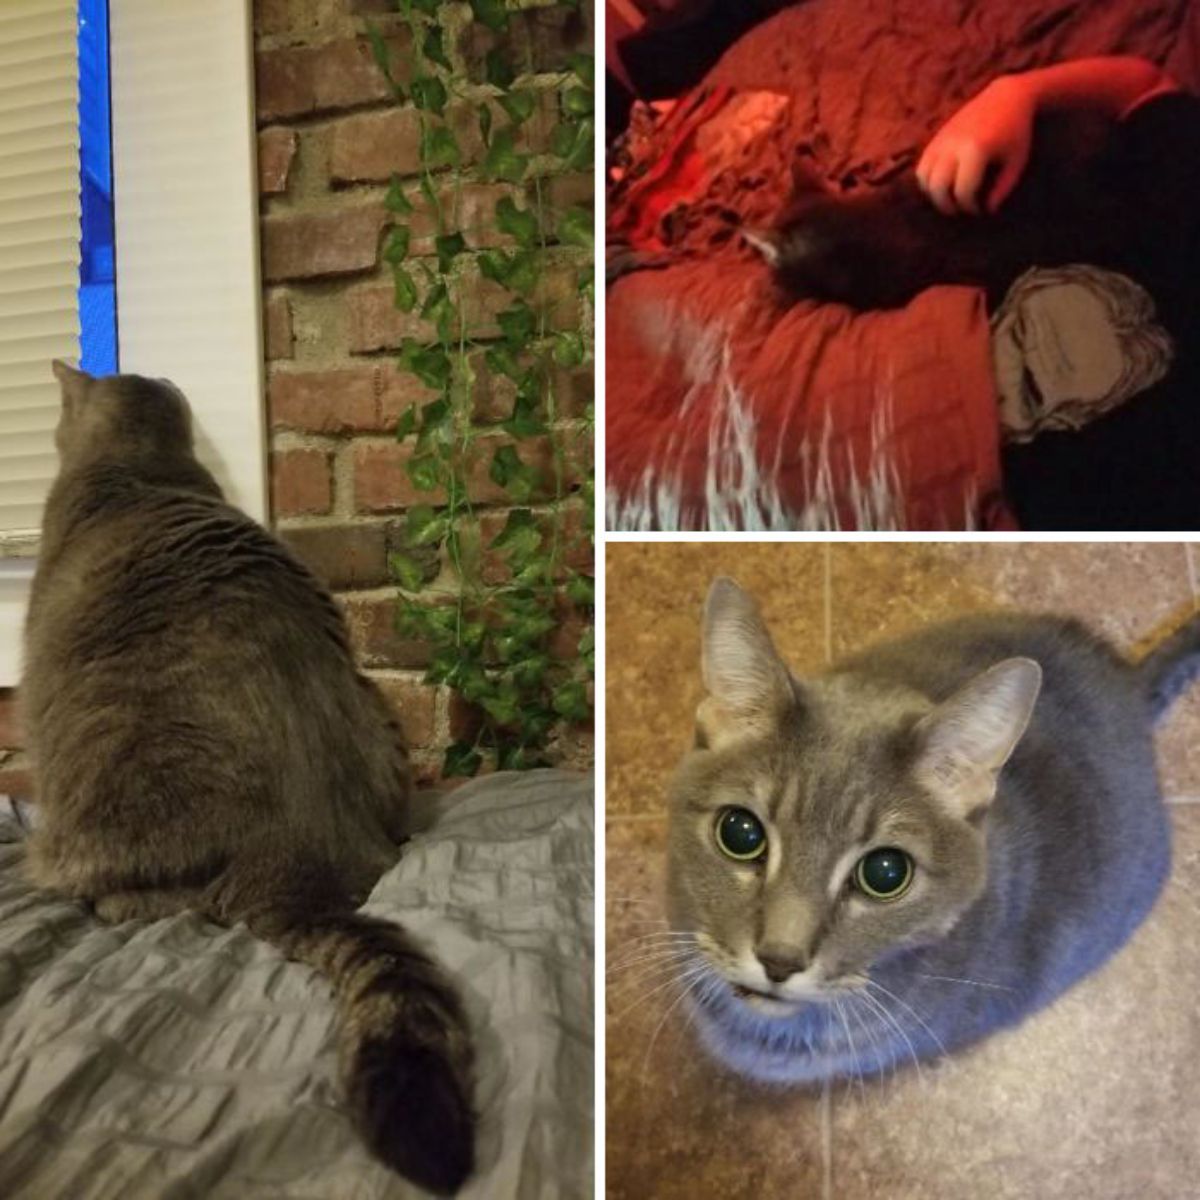 1 photo of the back of grey cat, 1 photo of the grey cat on a red bed getting petted, 1 photo of the grey cat sitting and looking up